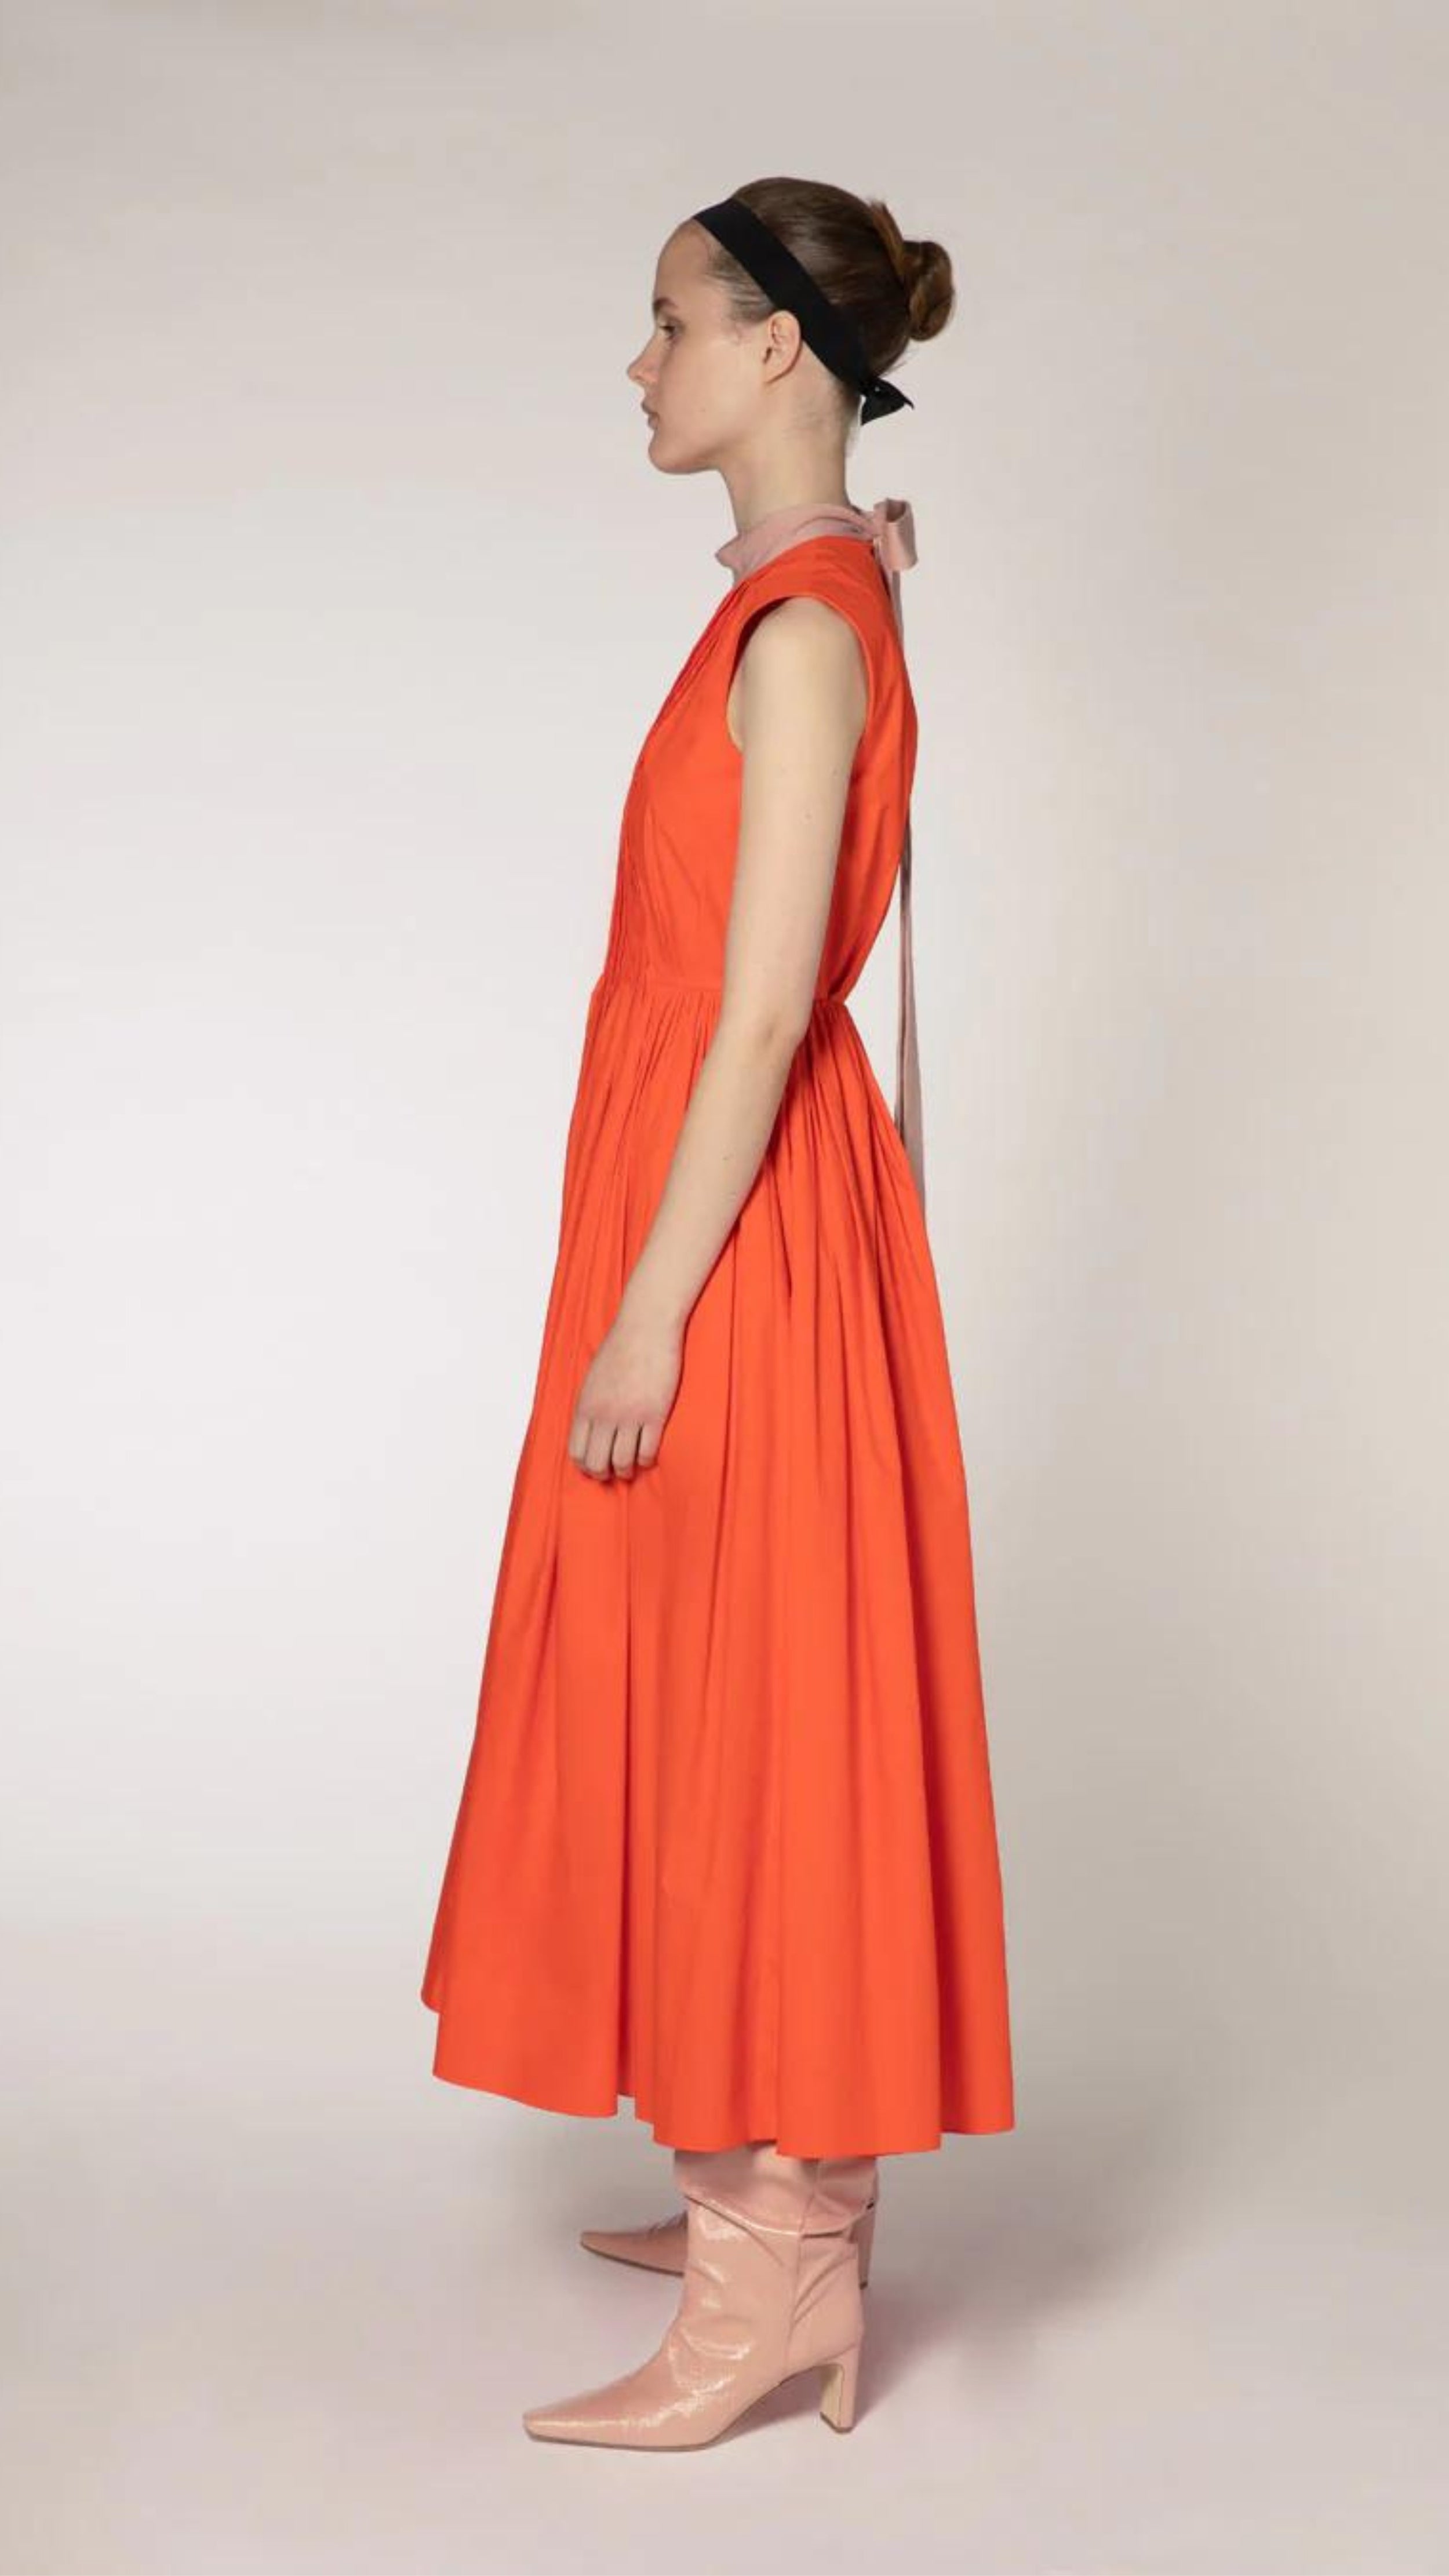 Roksanda The Prinesa Dress. Classic elegant orange cotton dress with a rounded neckline, fitted waist and pleated midi length skirt. Highlighted with a pale pink ribbon collar that ties at the nape of the neck. Shown on model facing side.